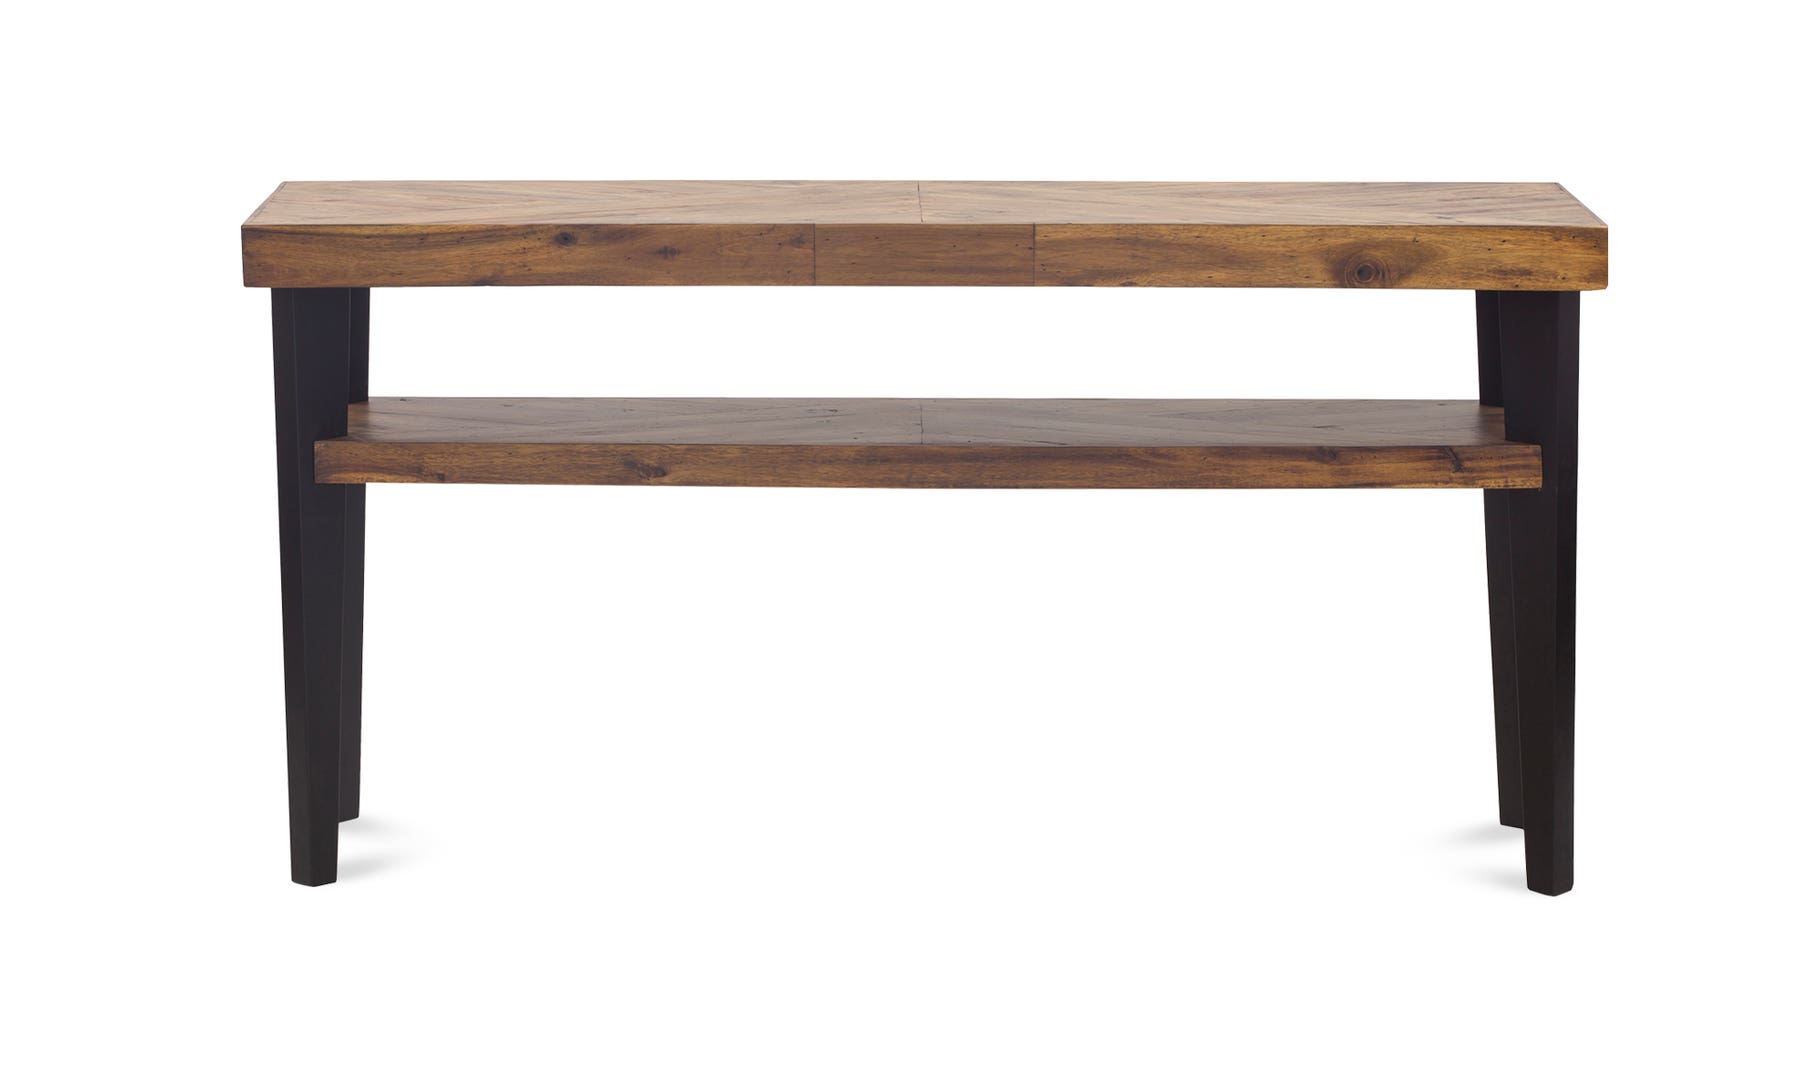 Parq Console Table - Click for Price Drop